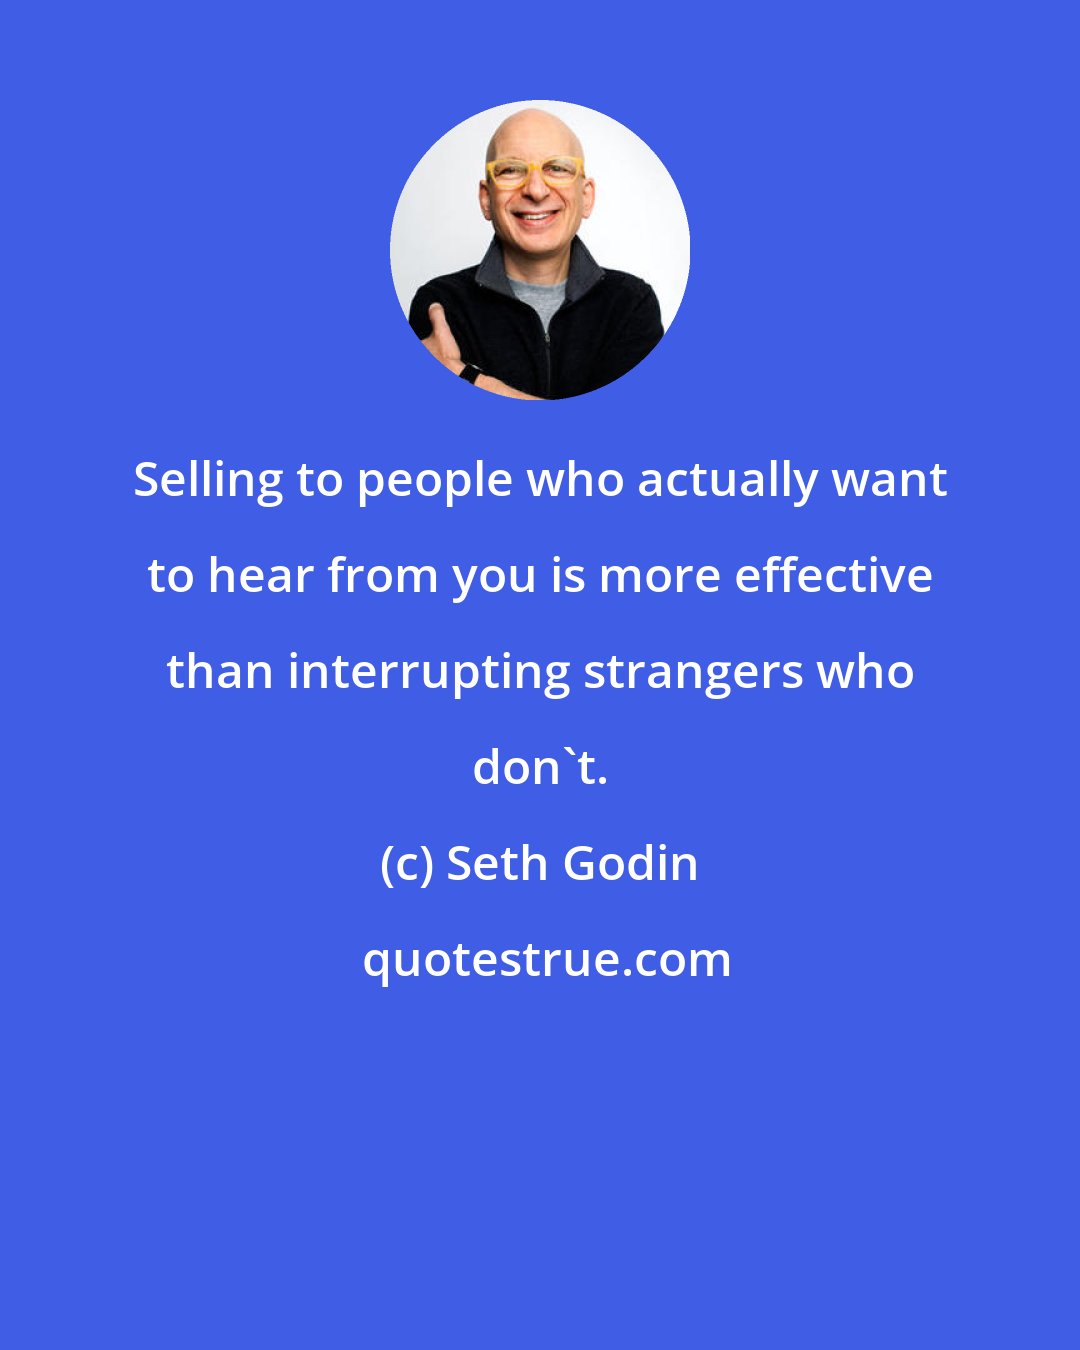 Seth Godin: Selling to people who actually want to hear from you is more effective than interrupting strangers who don't.